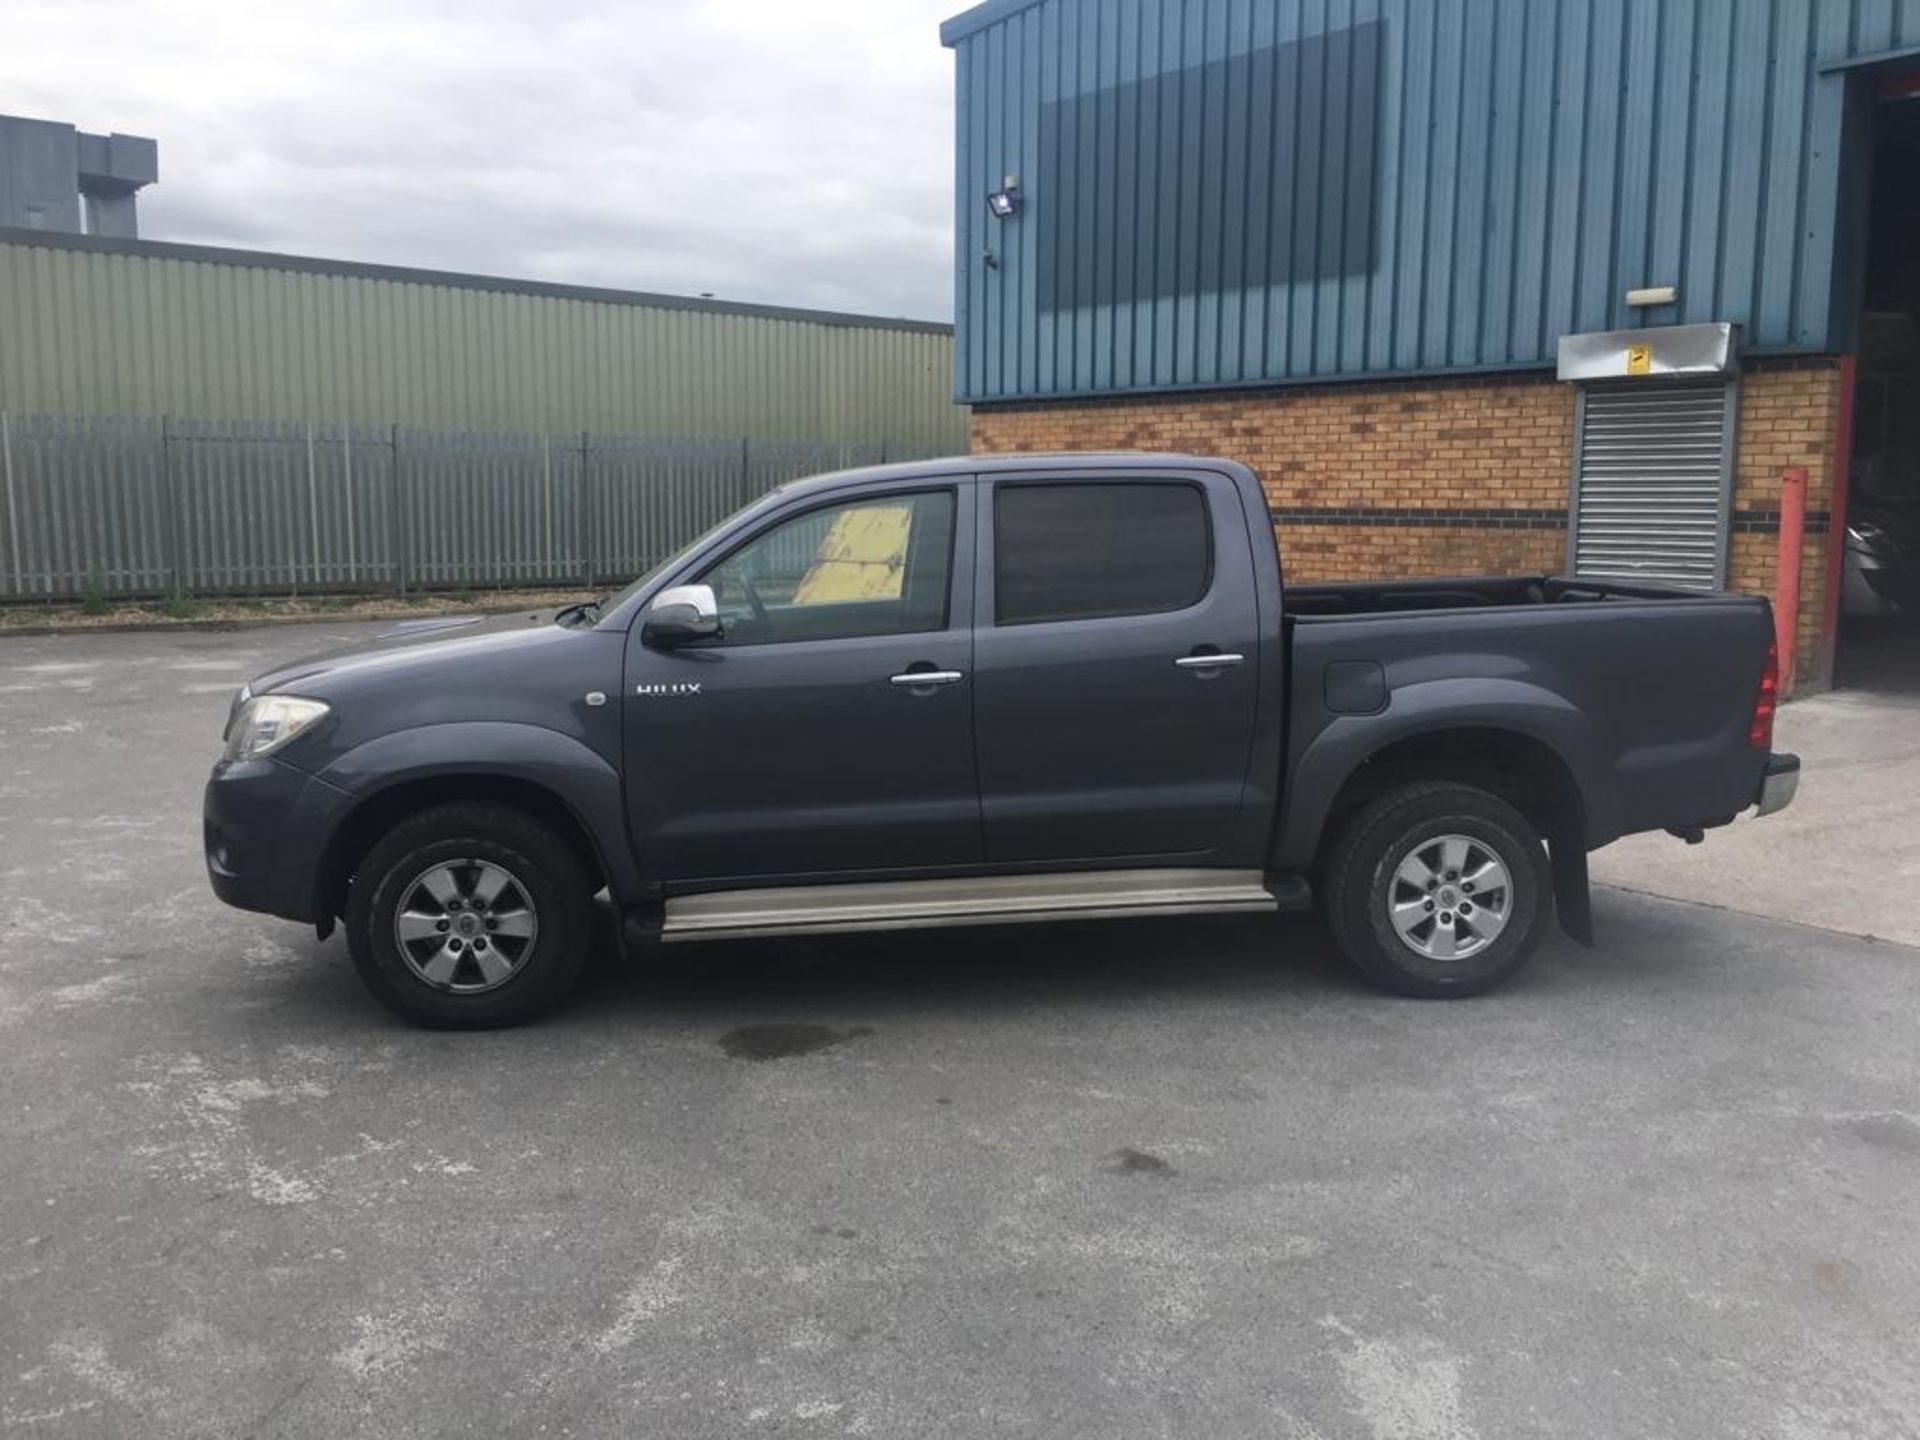 2010 TOYOTA HILUX DIESEL DOUBLE CAB PICKUP - Image 8 of 15